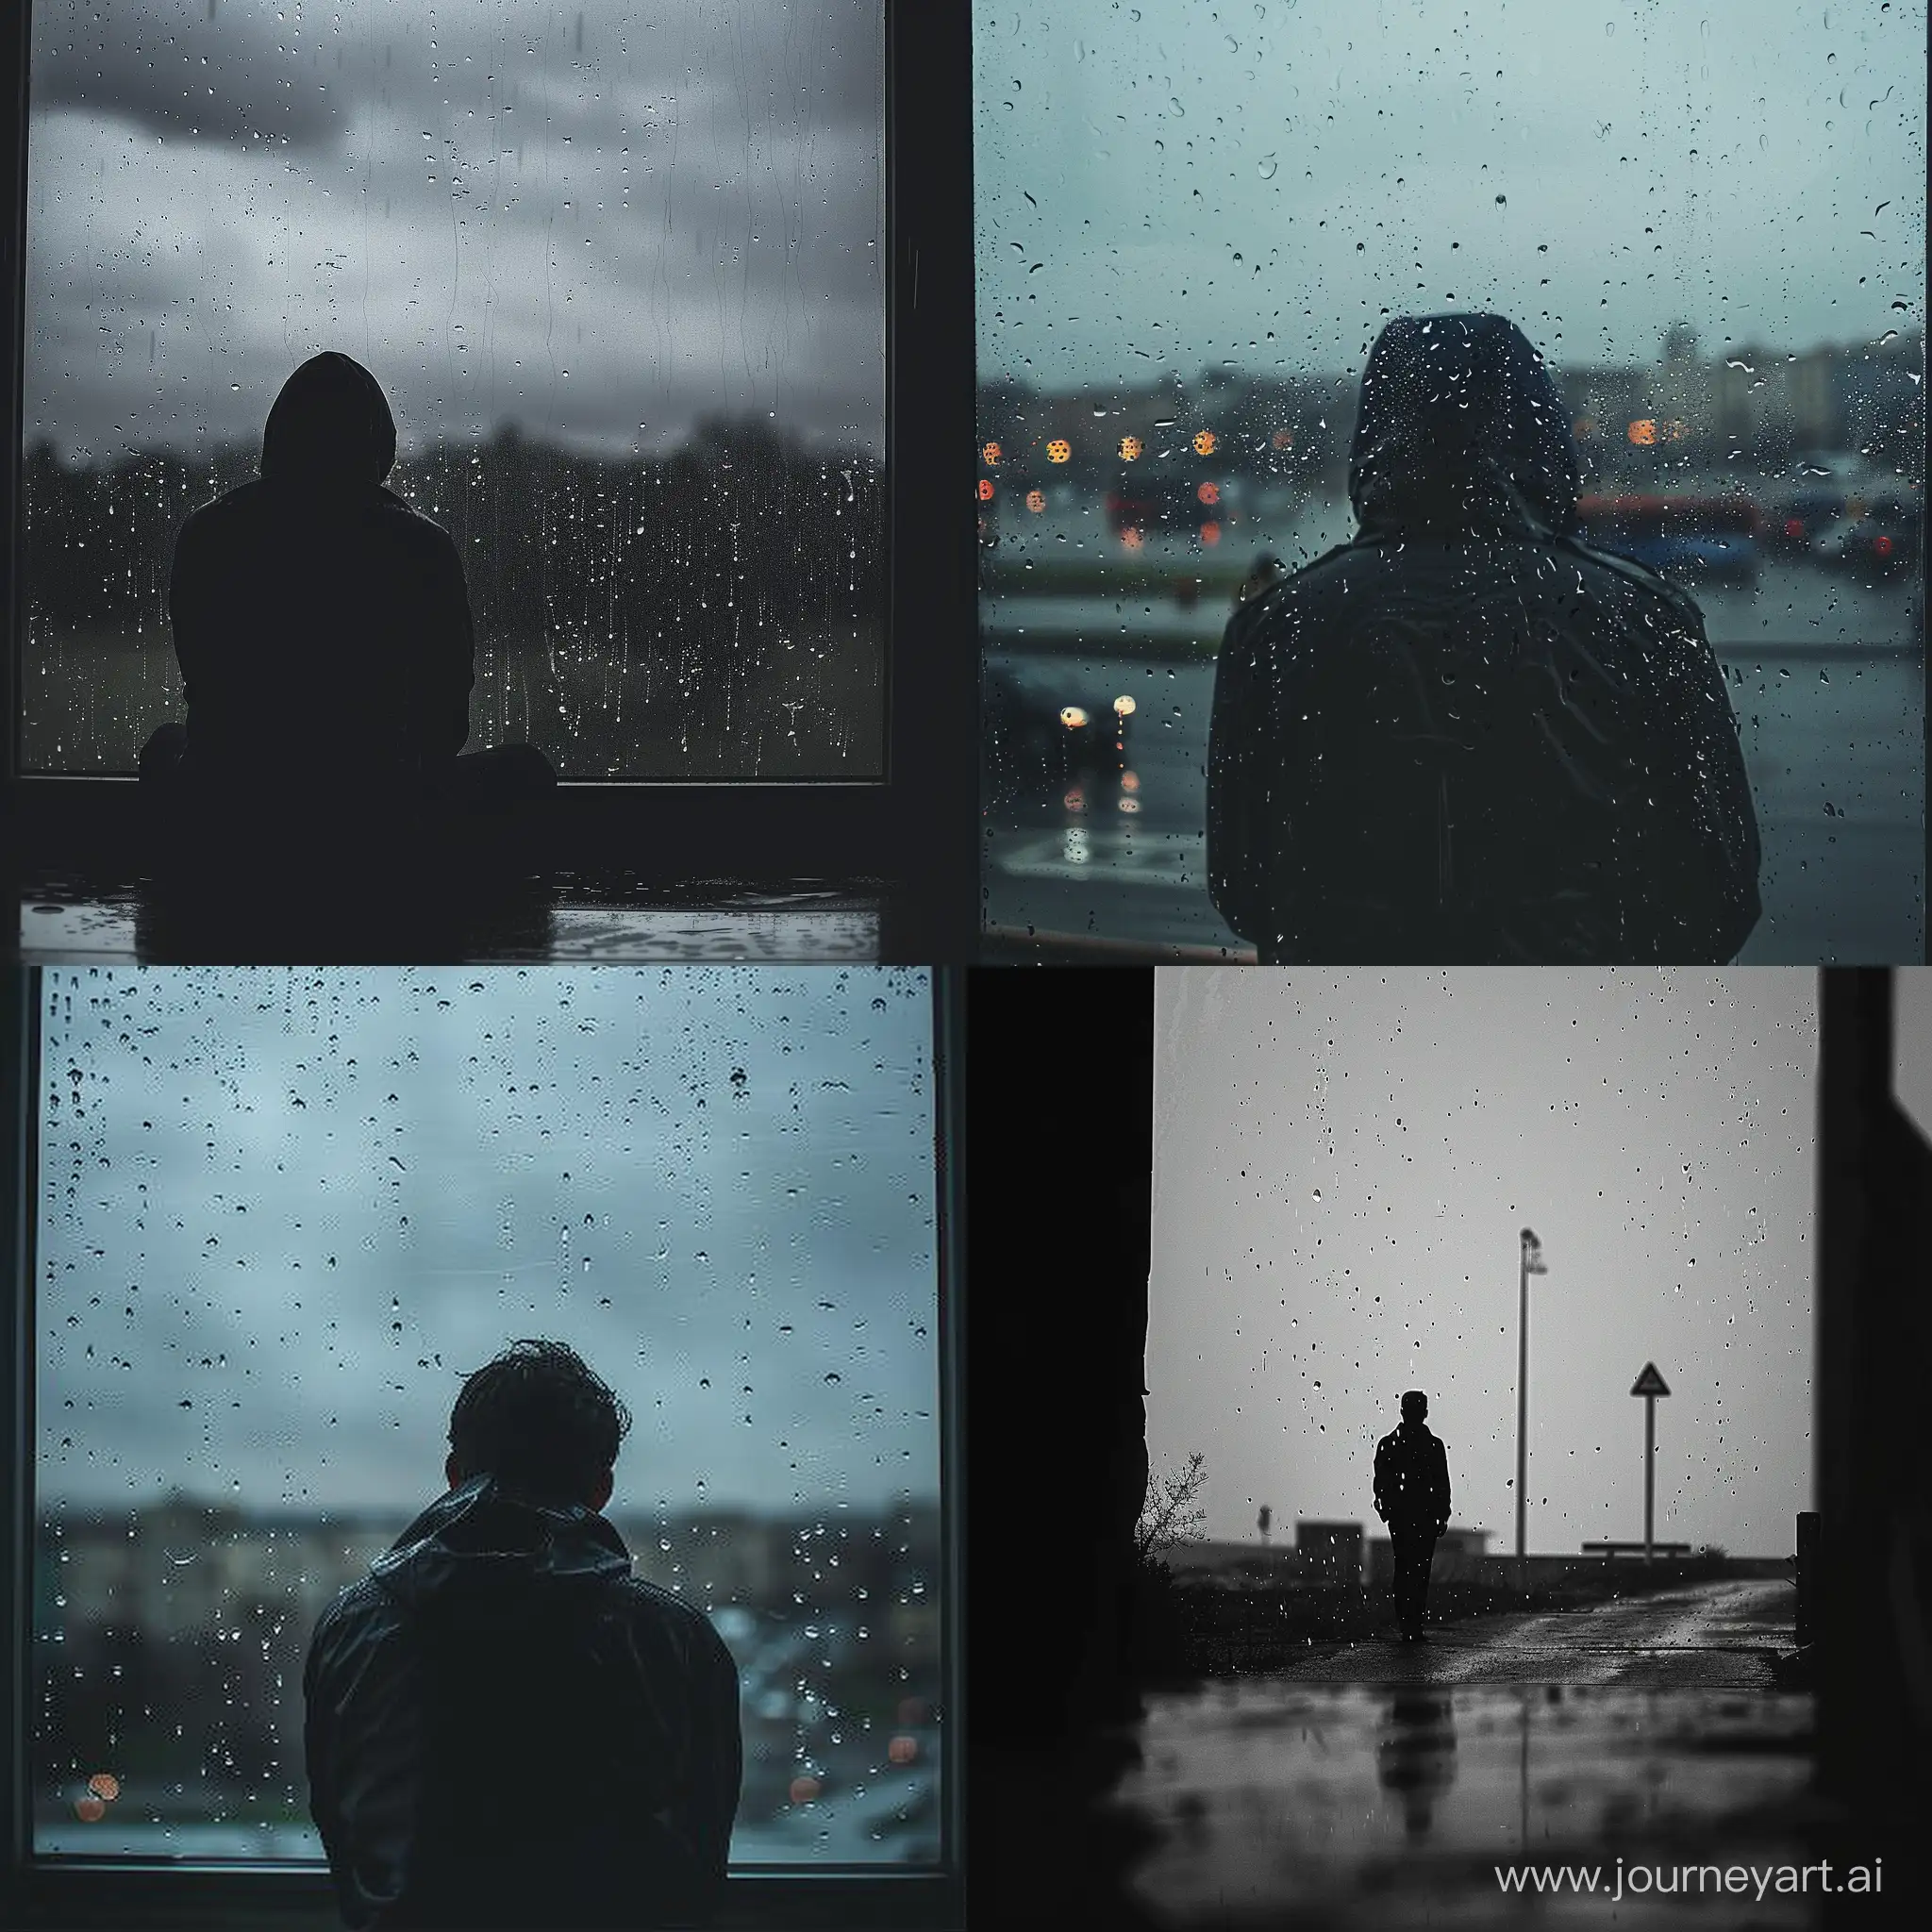 Lonley depressed view pic of outside in a rainy day and the sky is like a werid black color